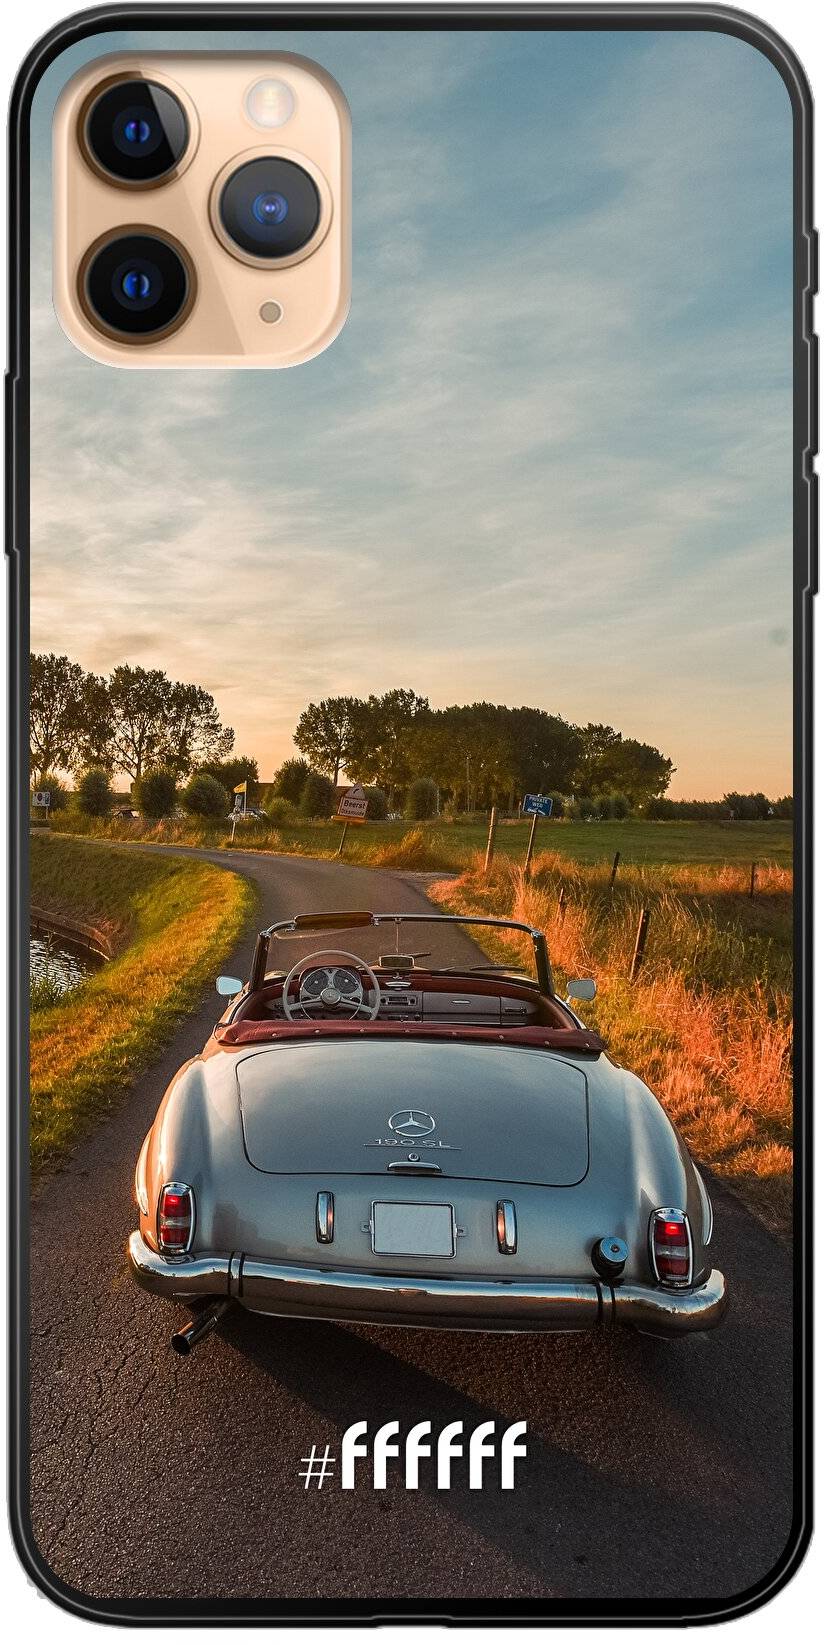 Oldtimer iPhone 11 Pro Max